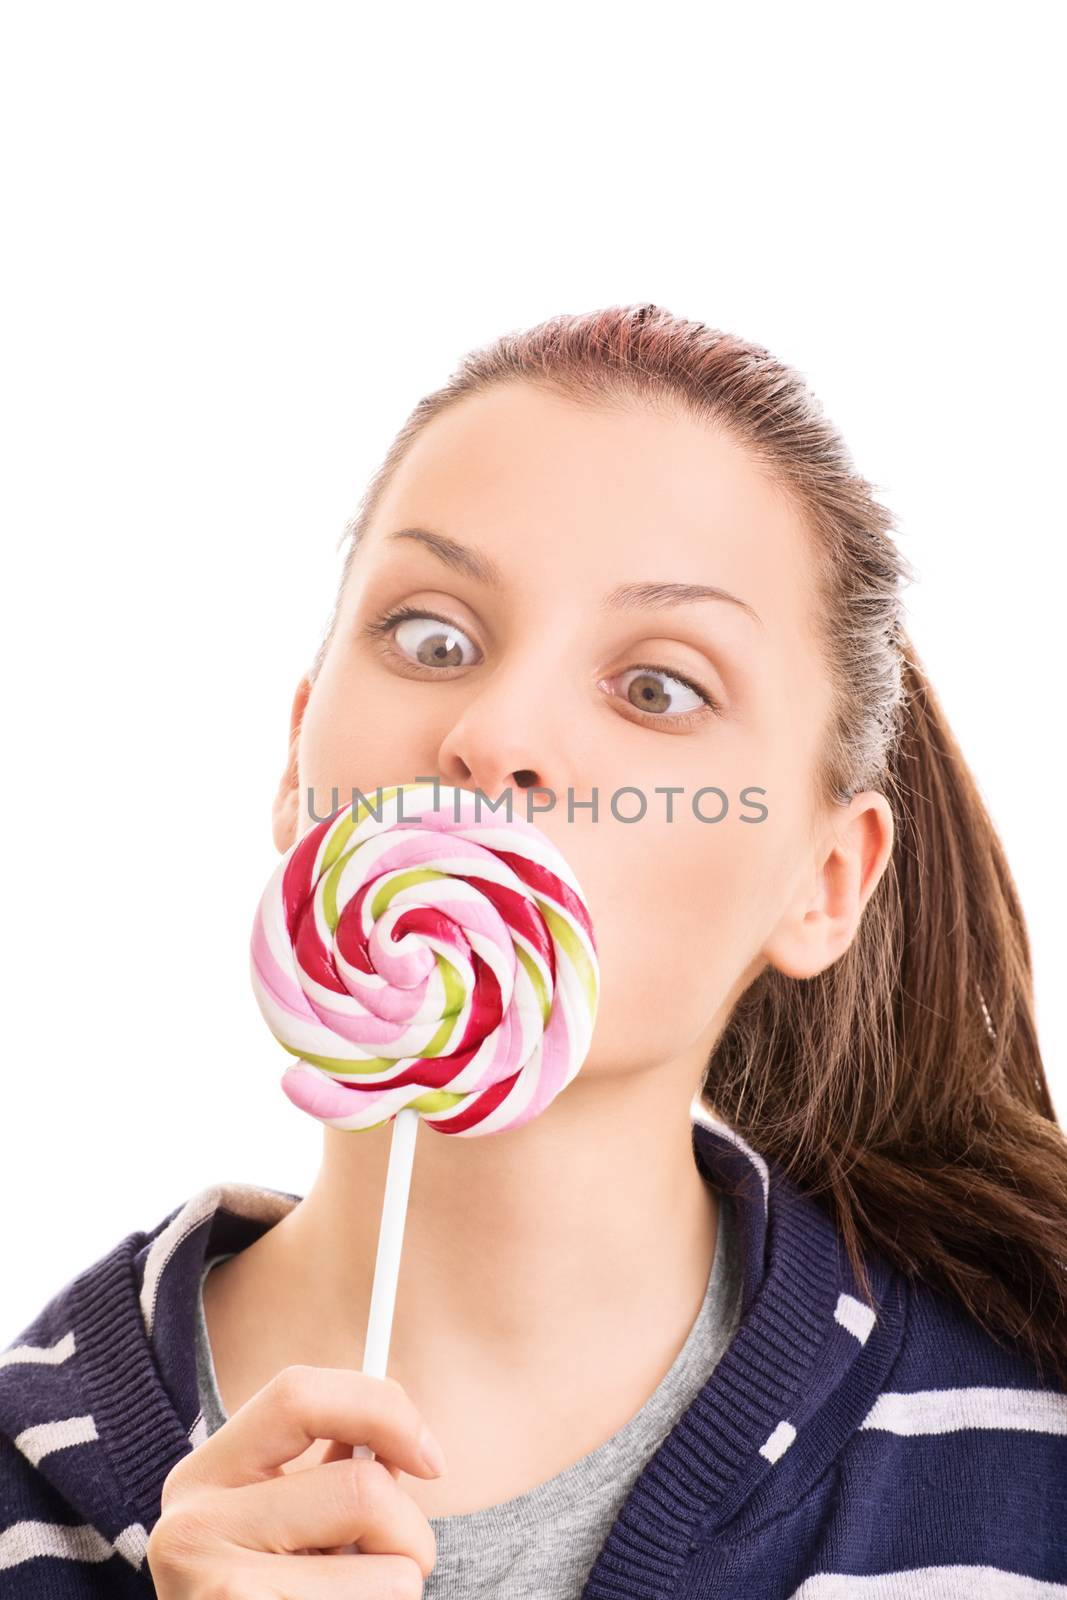 Mmm, sweets, can't resist them. Beautiful young girl holding a lollipop, making funny face, isolated on white background.